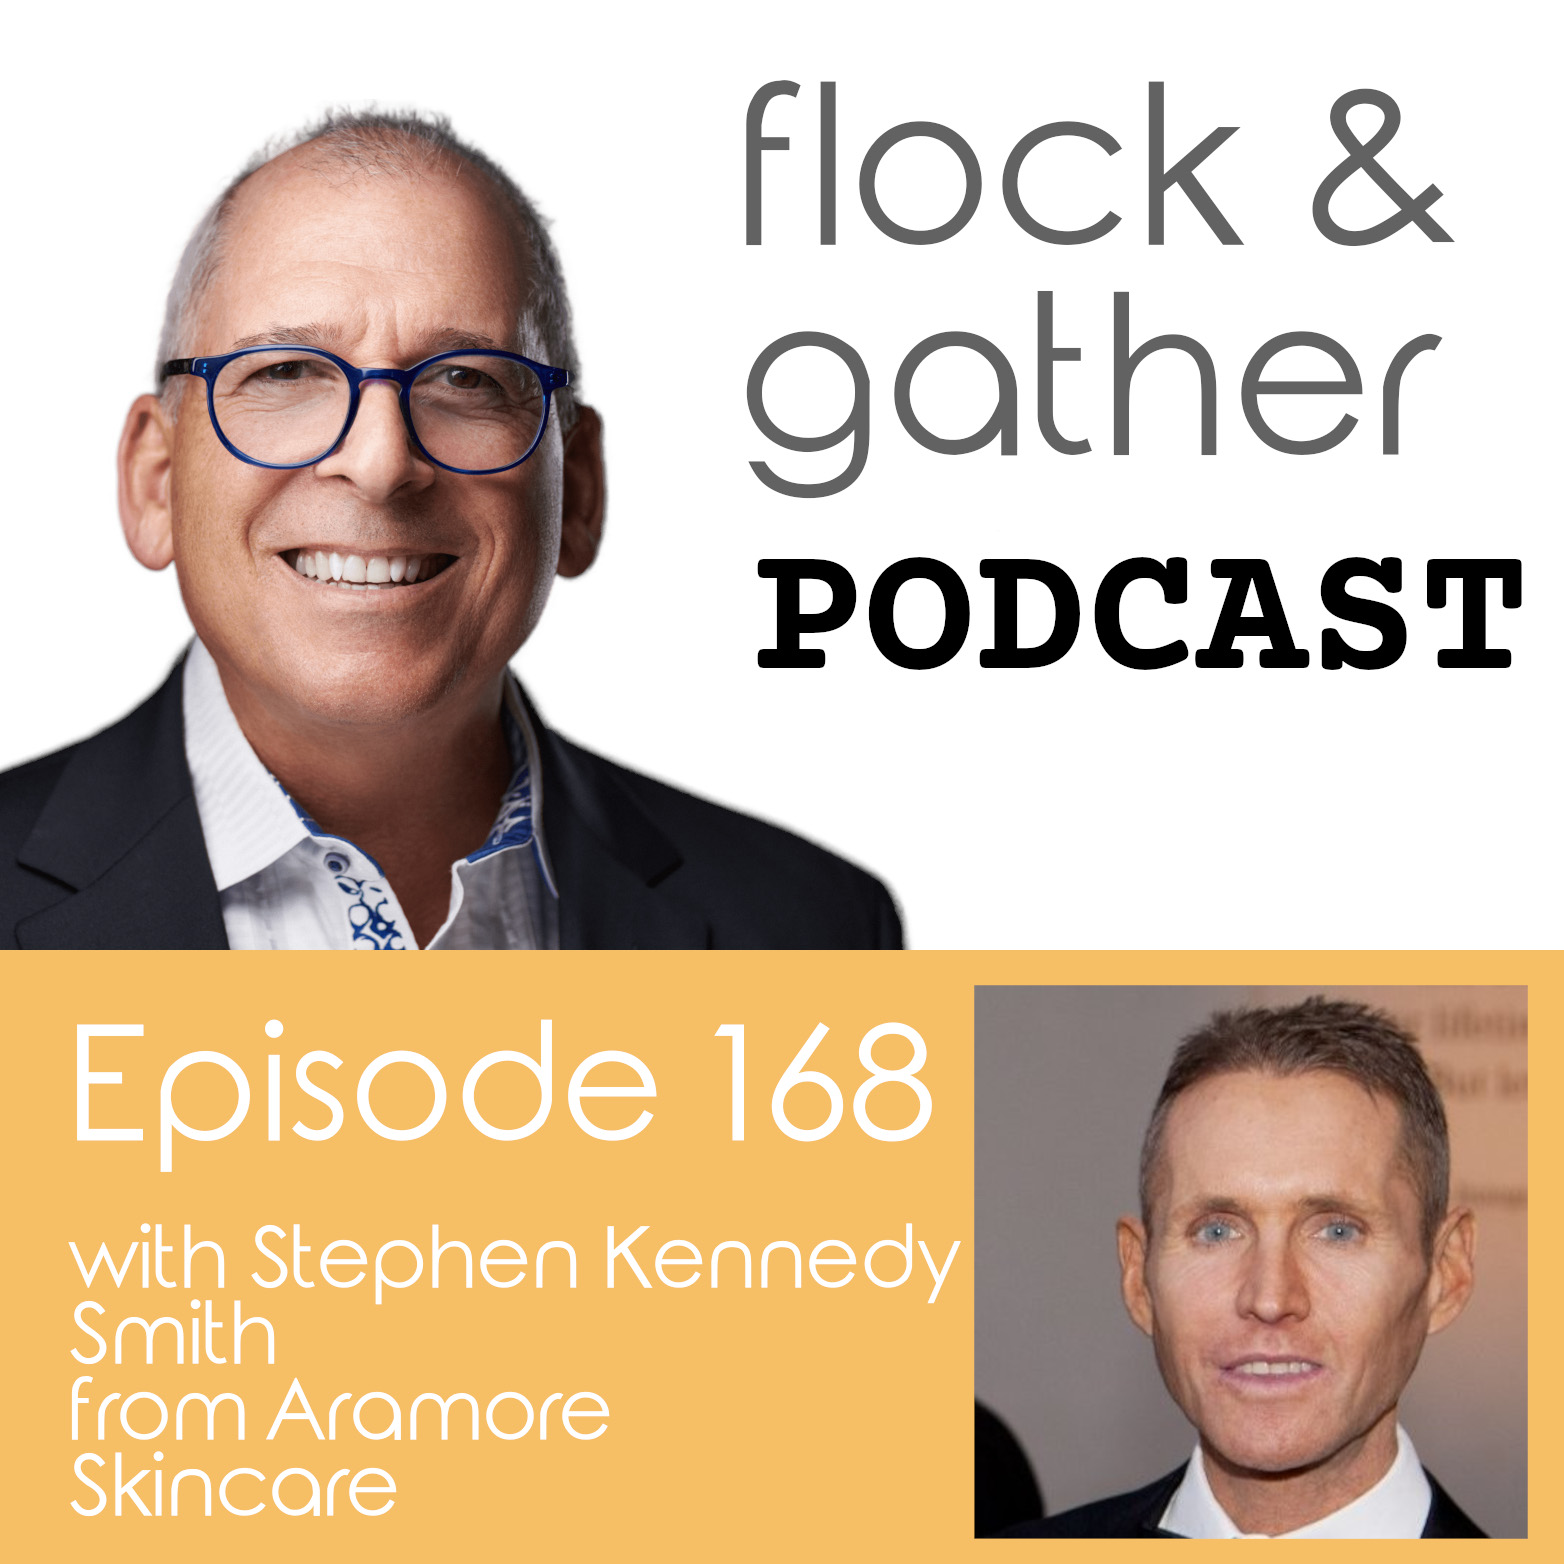 Flock and Gather Podcast.  Episode 168 with Stephen Kennedy Smith from Amore Skincare!